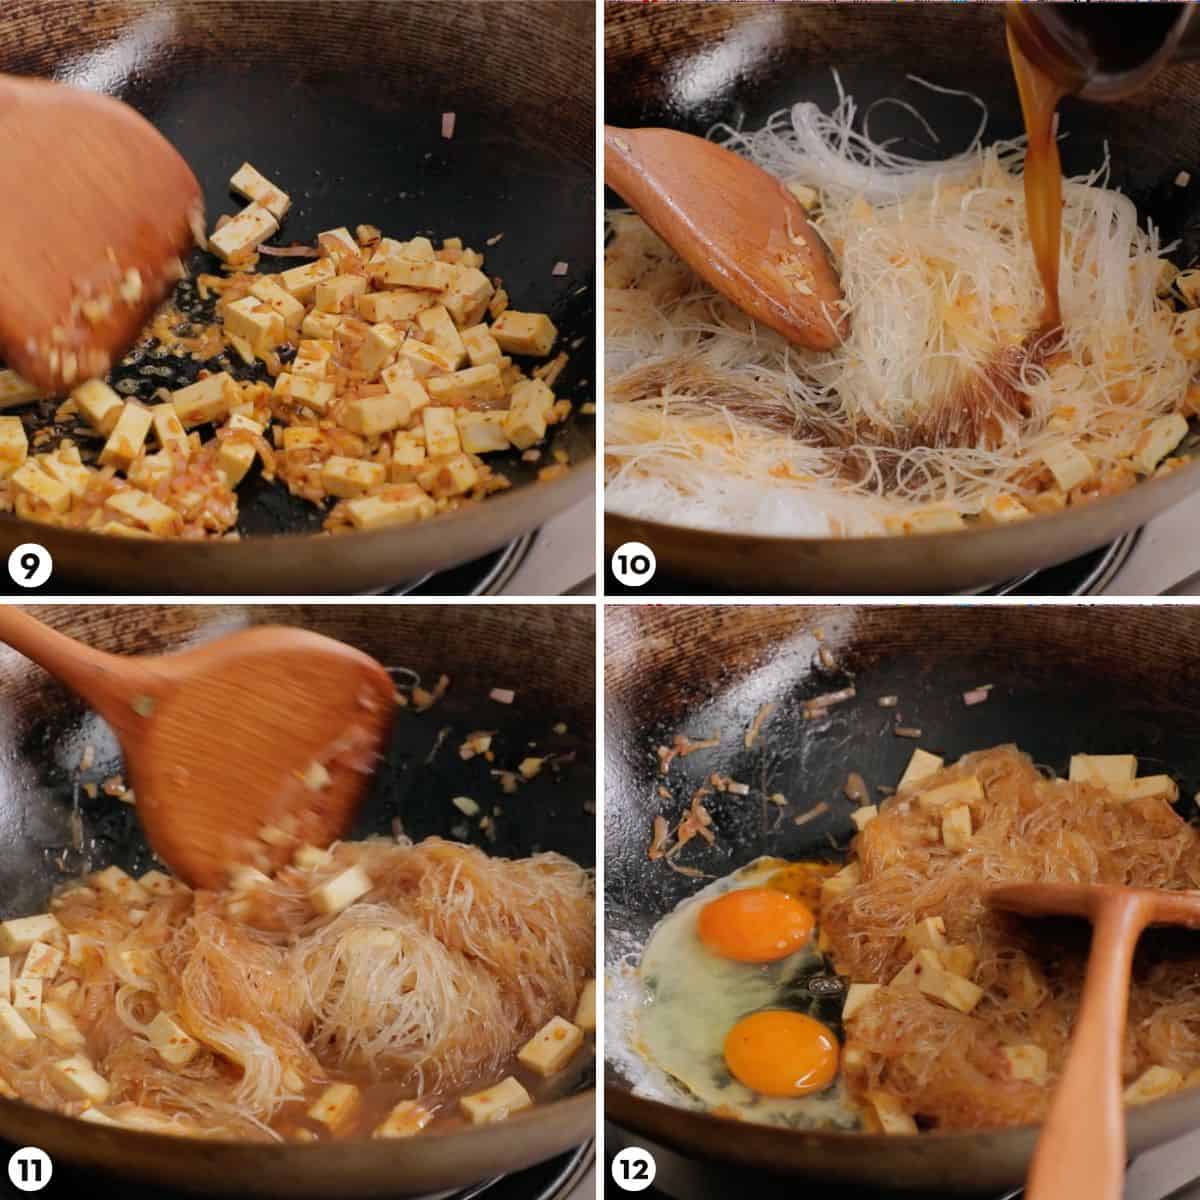 Process shots for making pad thai with glass noodles steps 9-12